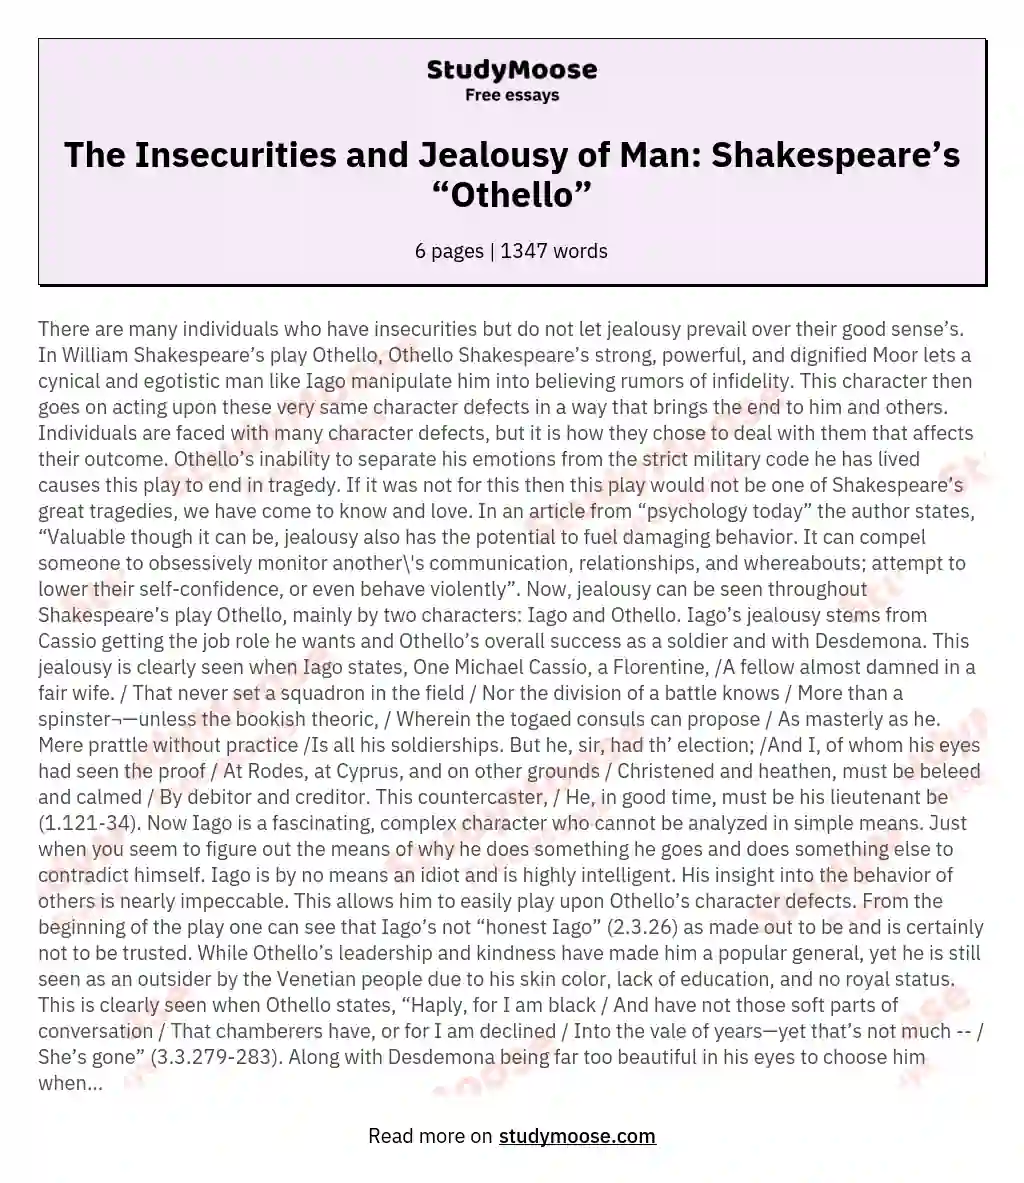 The Insecurities and Jealousy of Man: Shakespeare’s “Othello” essay